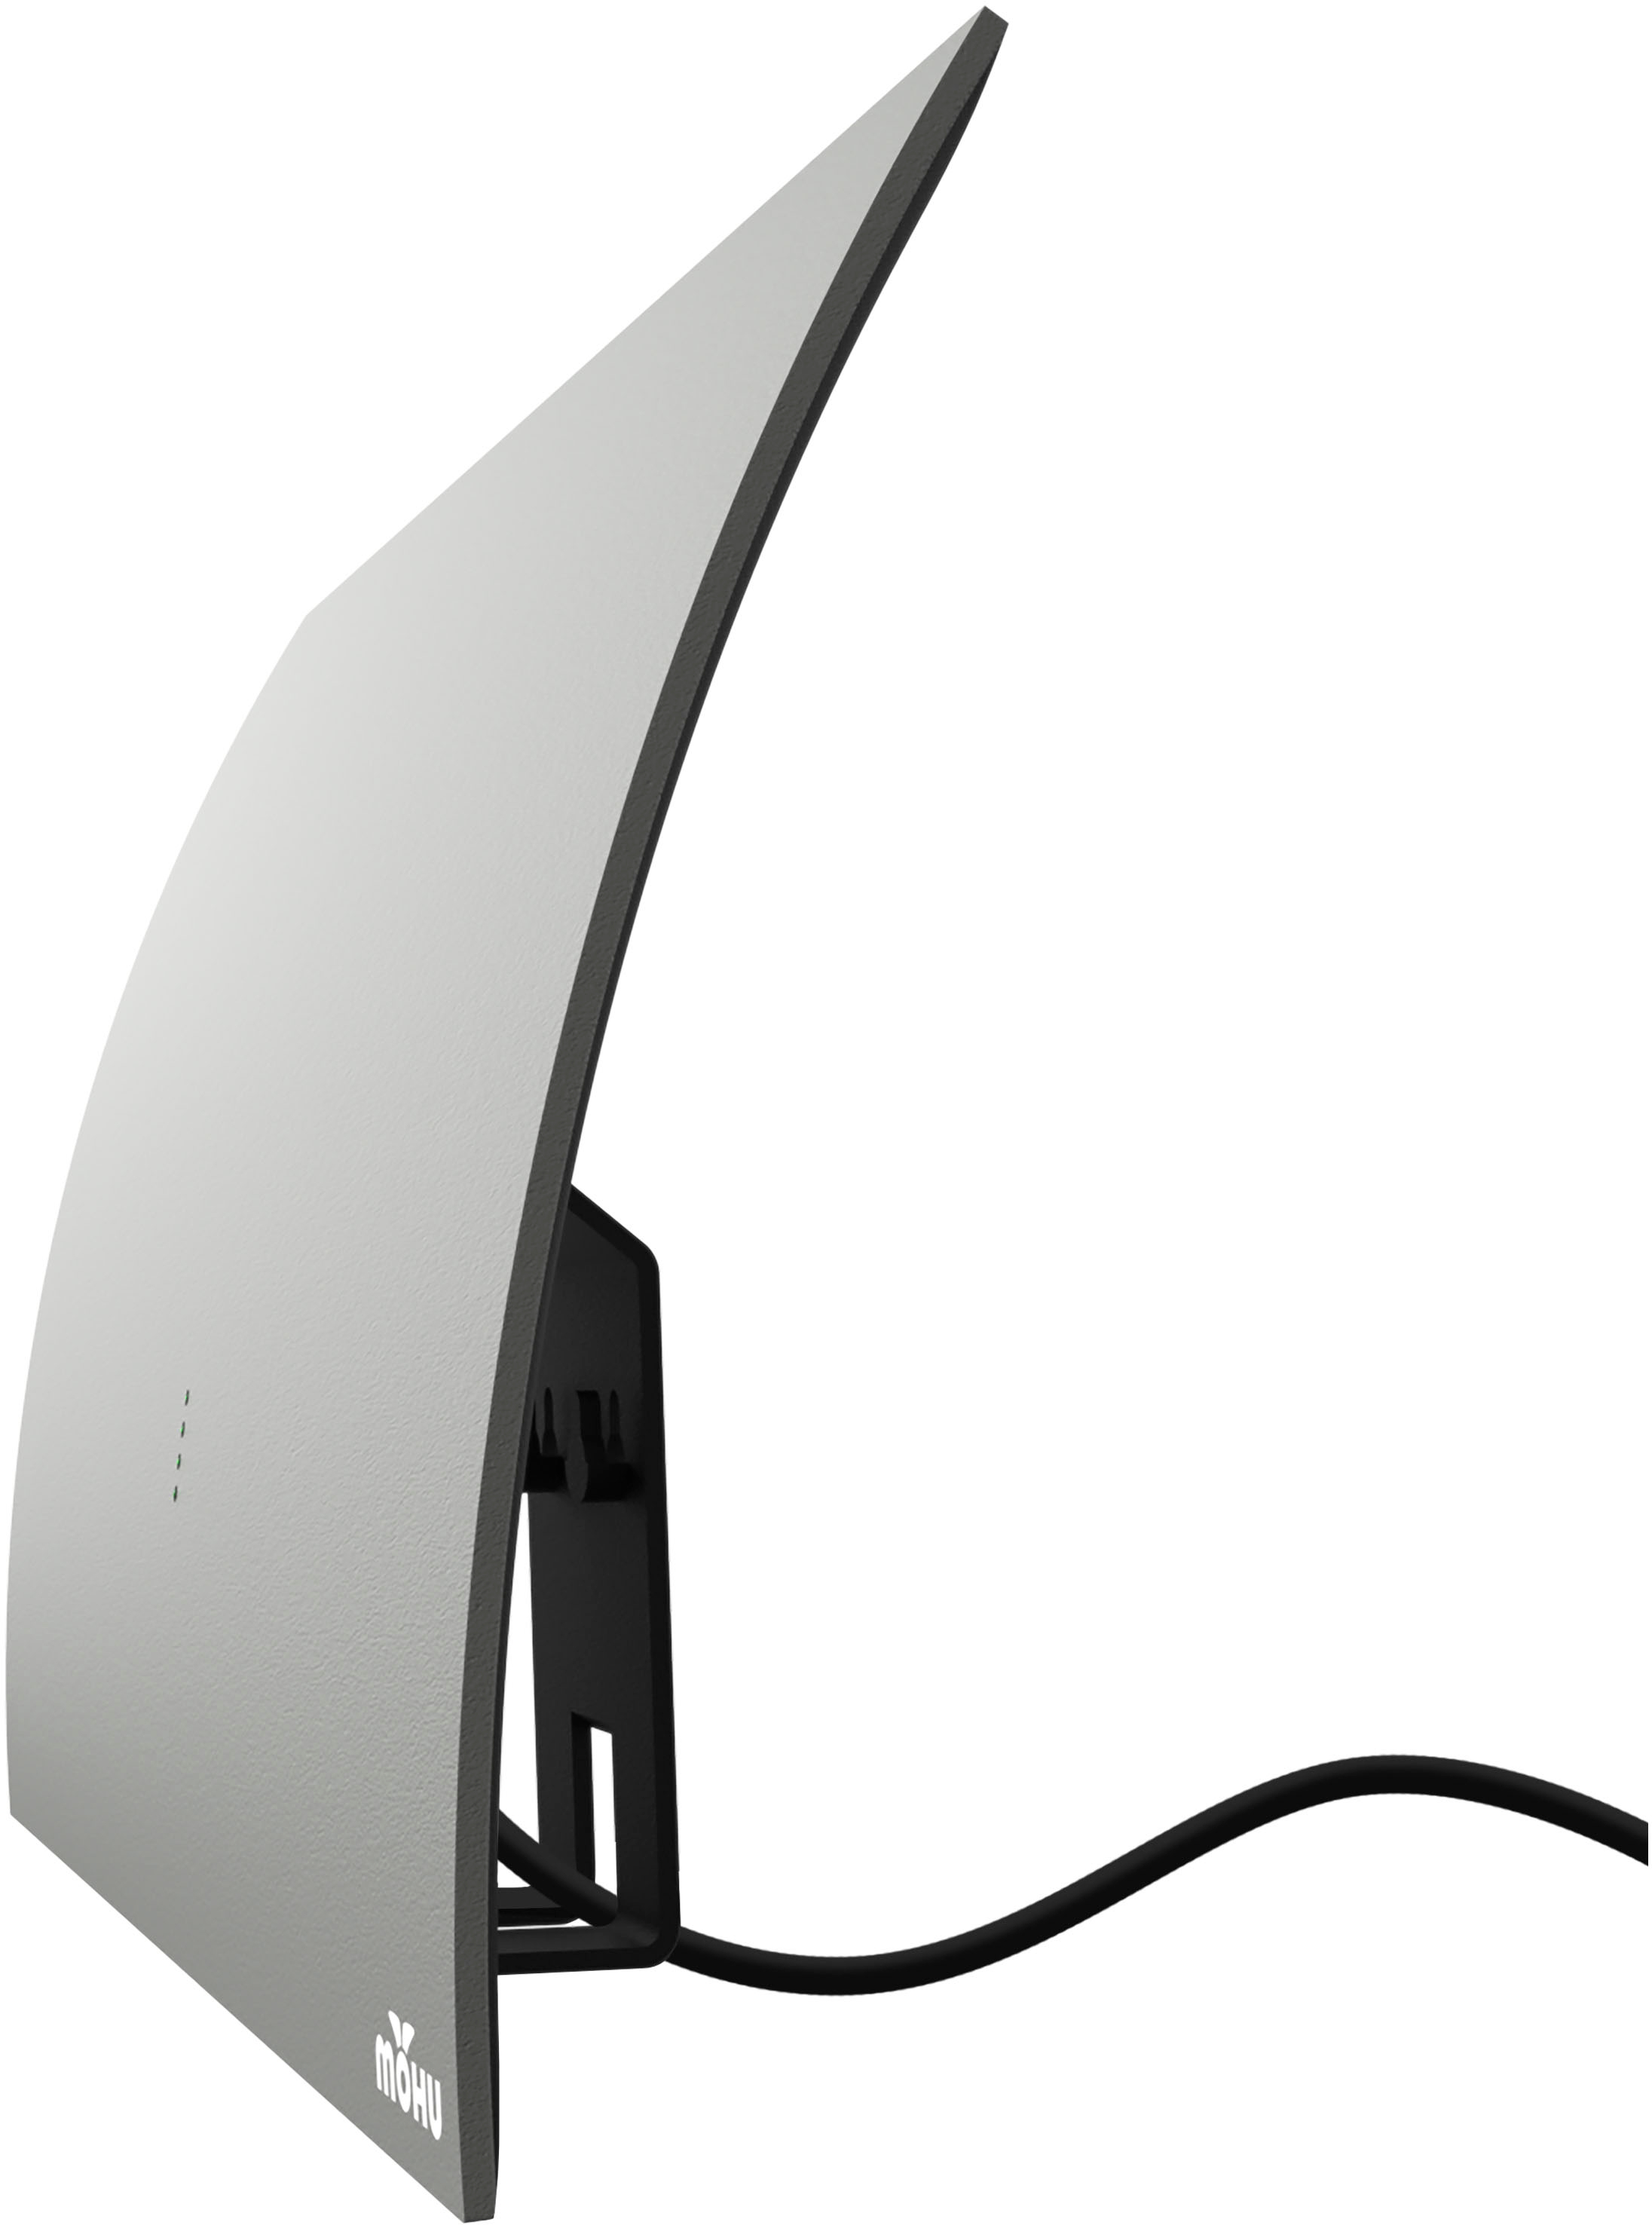 Angle View: Mohu - Gateway Plus Amplified Indoor HDTV Antenna, 60-mile Range - Gray